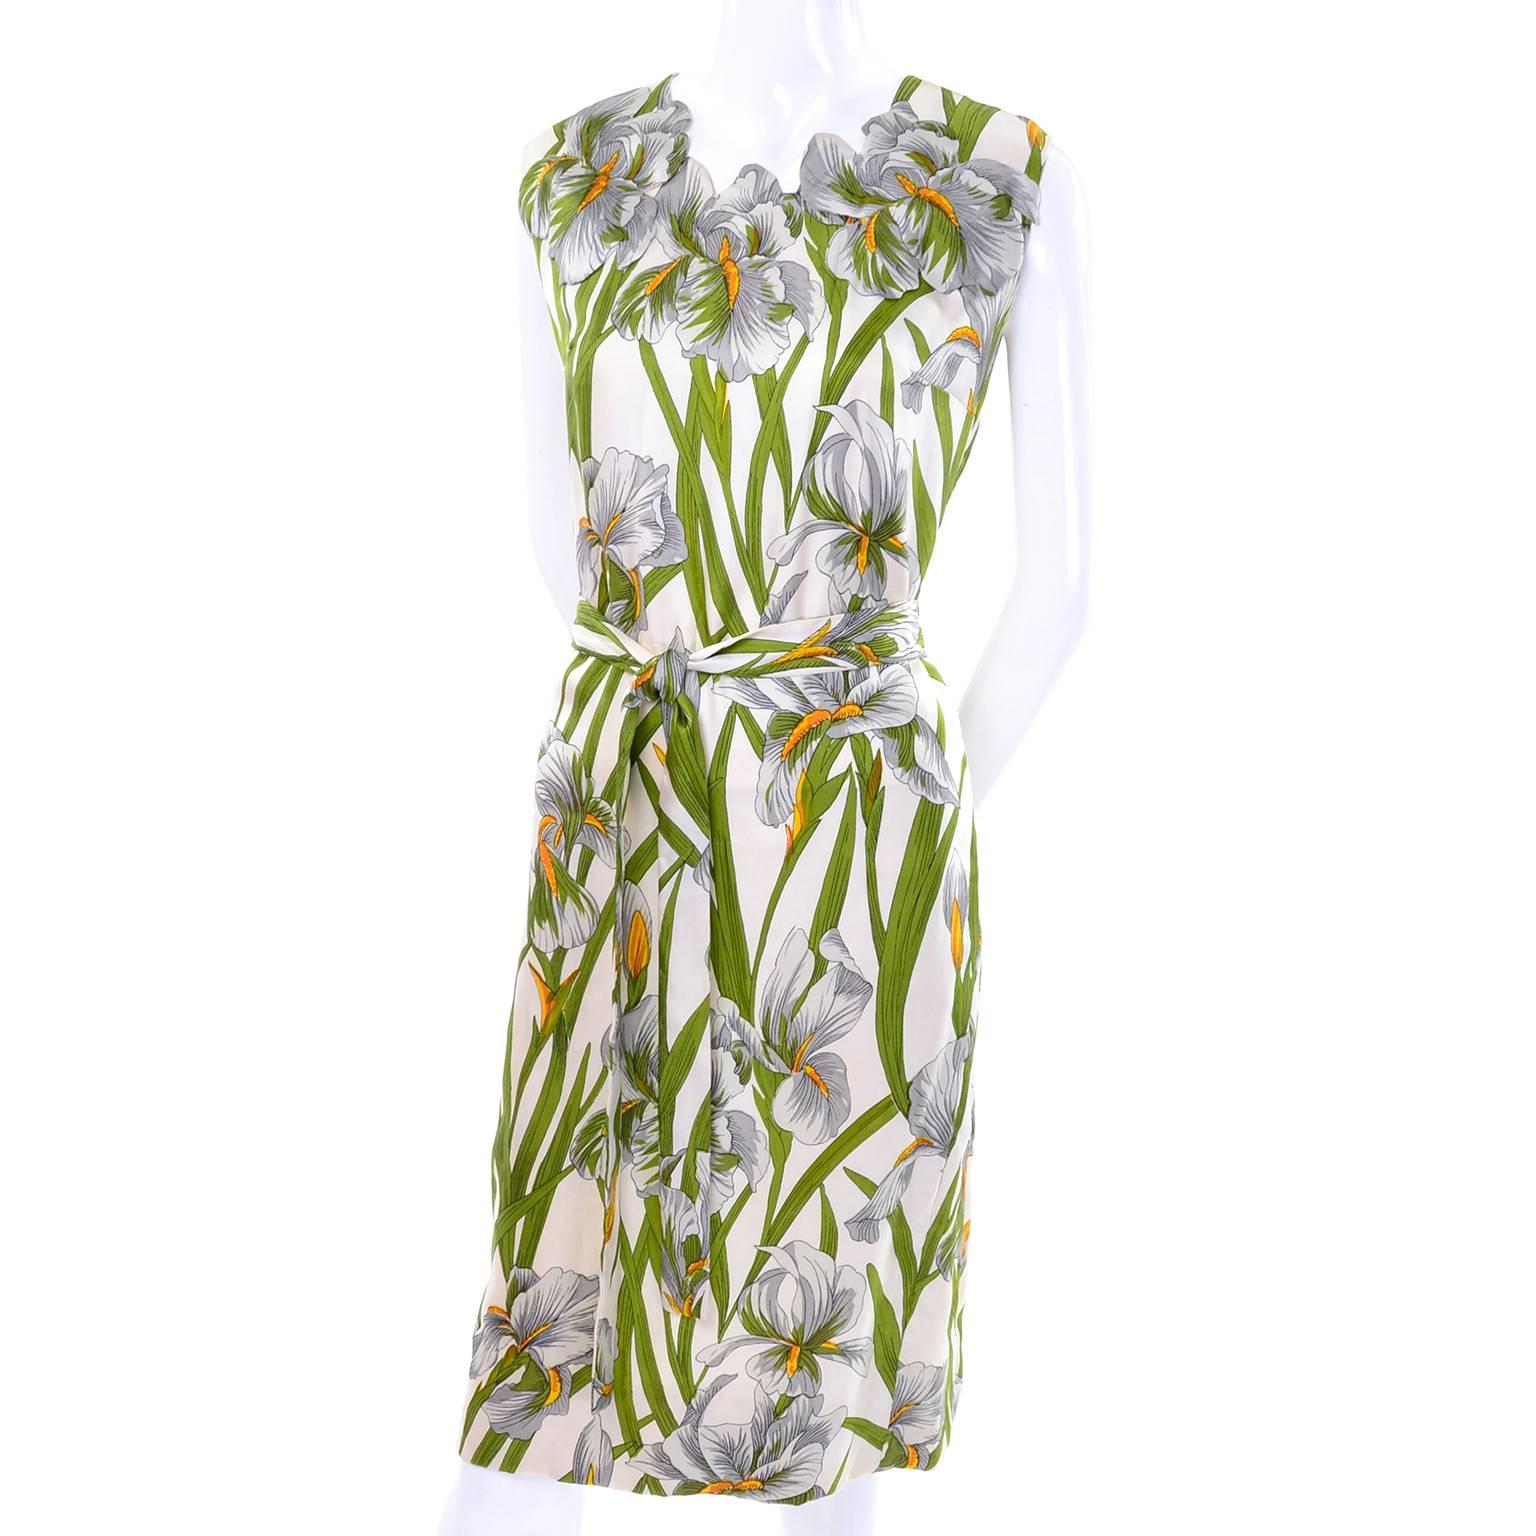 Vintage Silk Donald Brooks Dress With Spring White Iris Flowers and Green Leaves 2